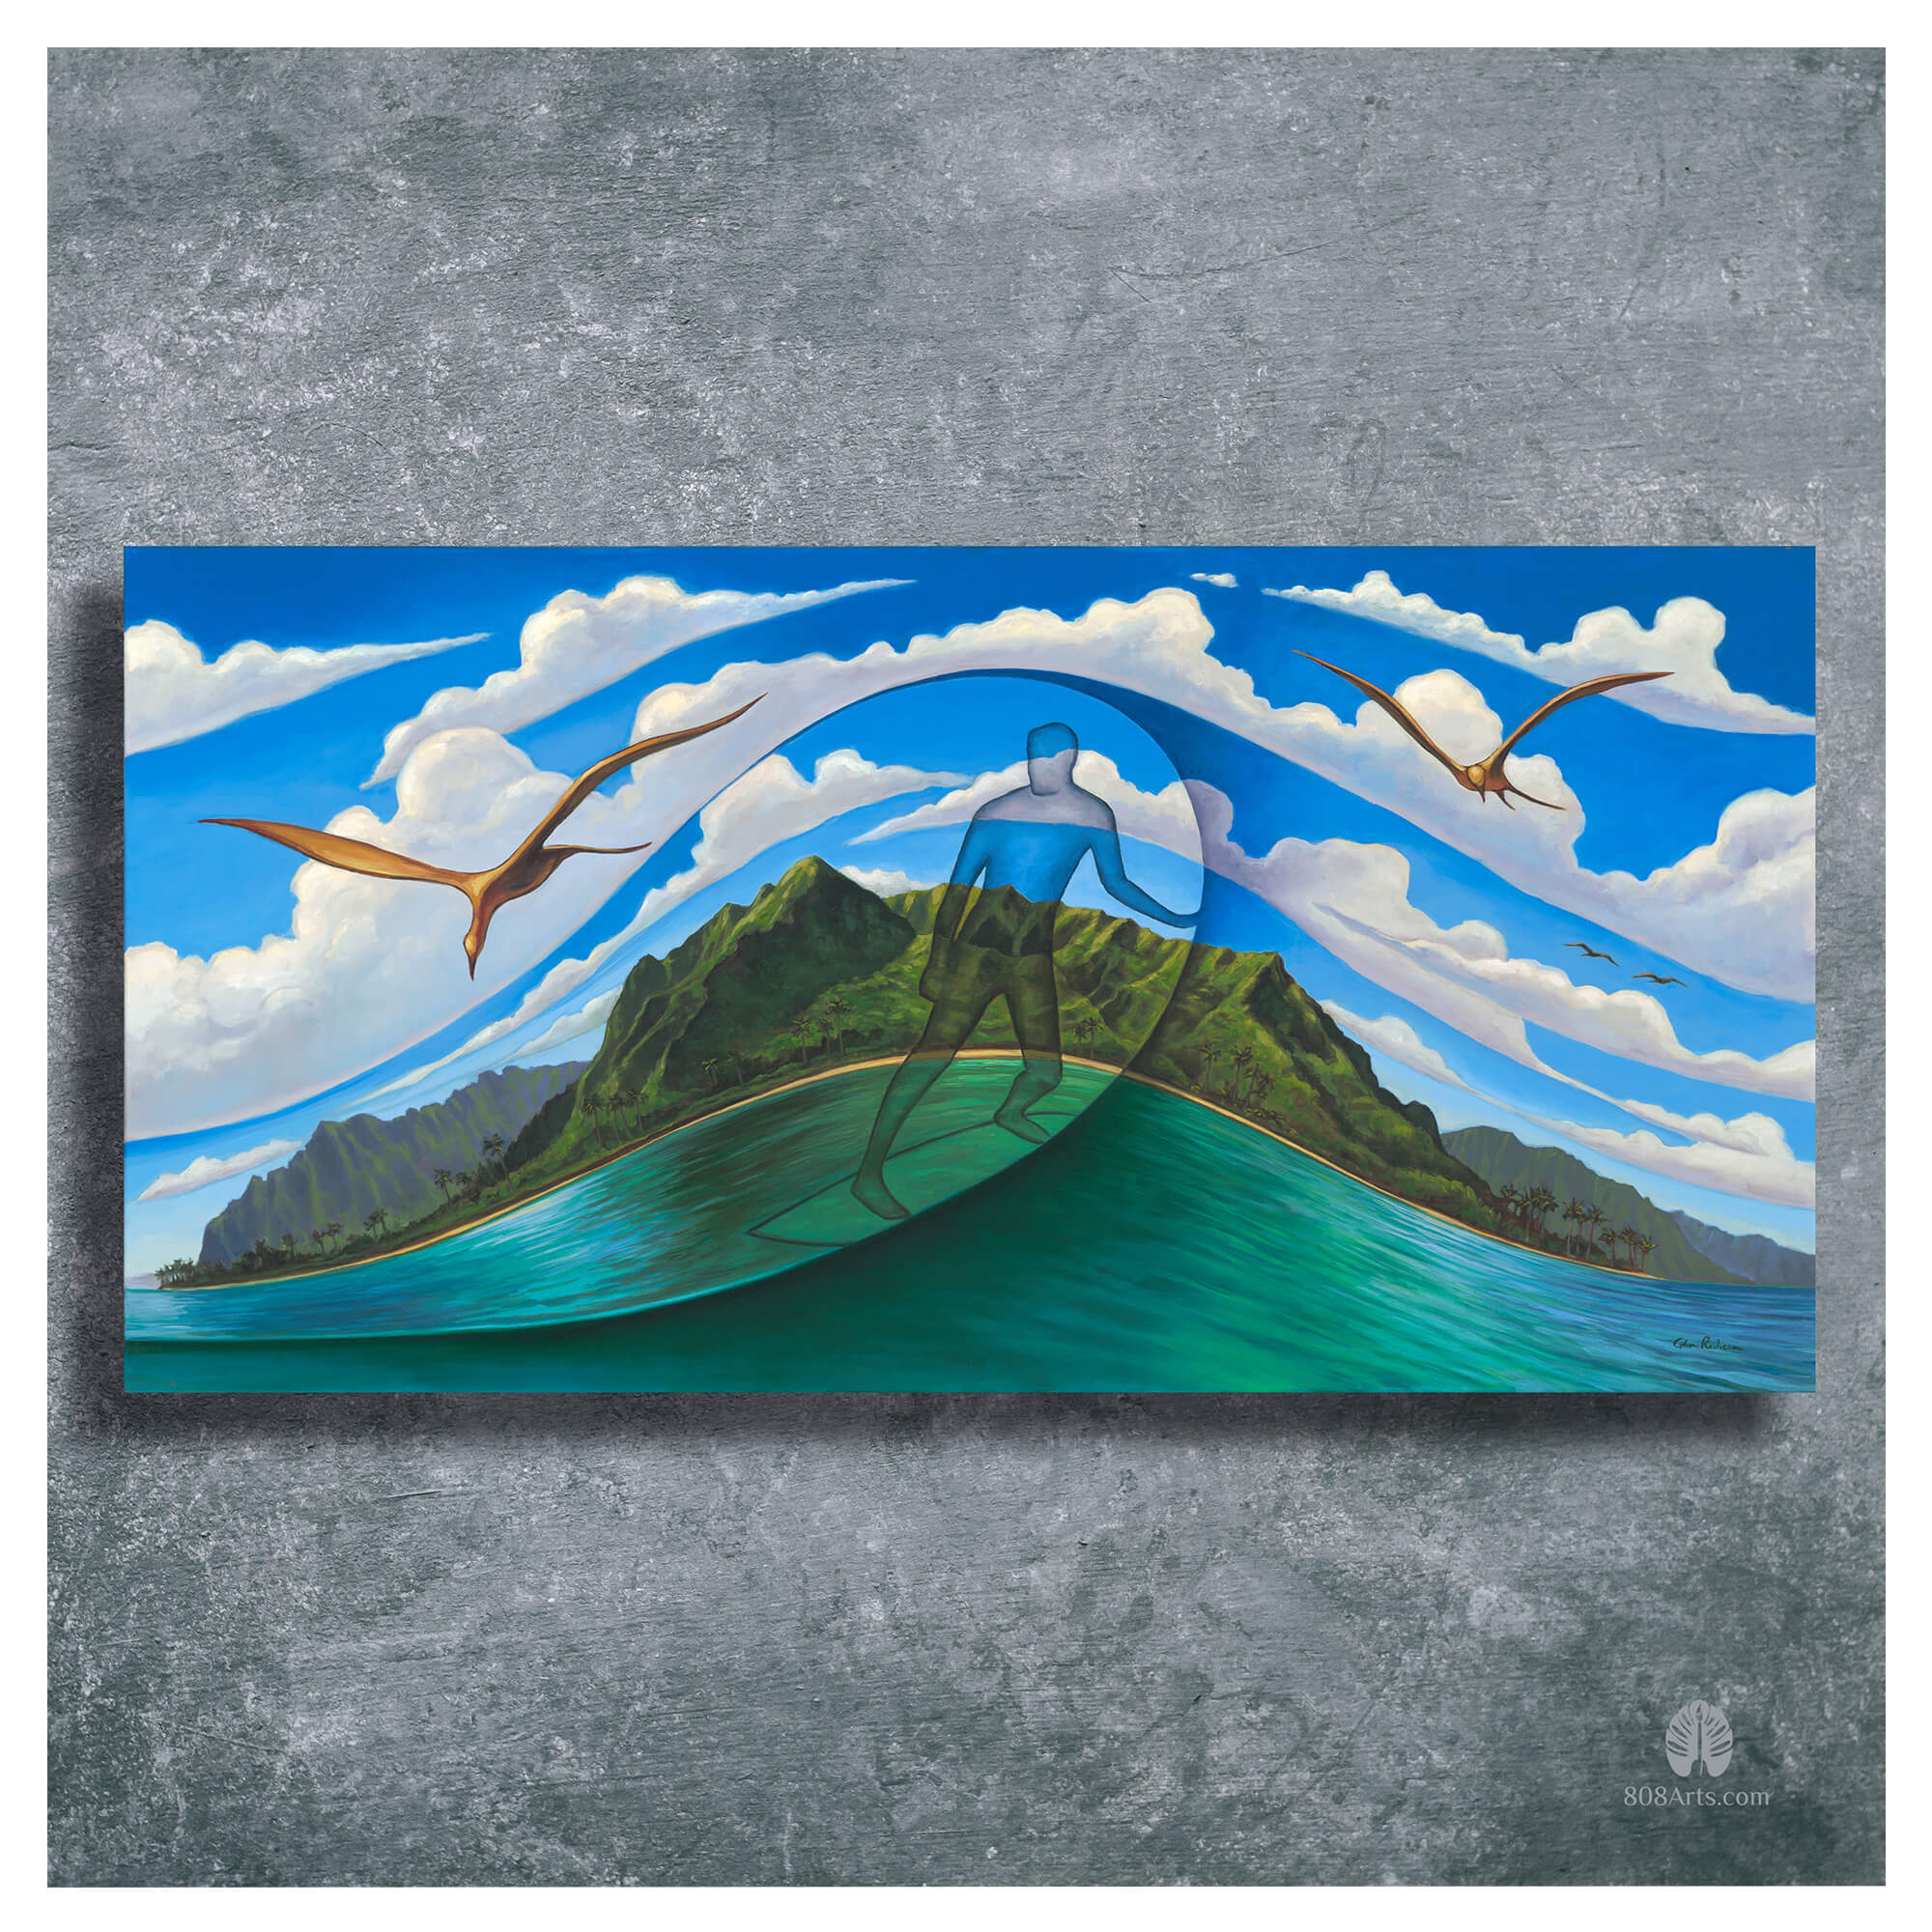 A surfer with a tropical island background by Hawaii artist Colin Redican